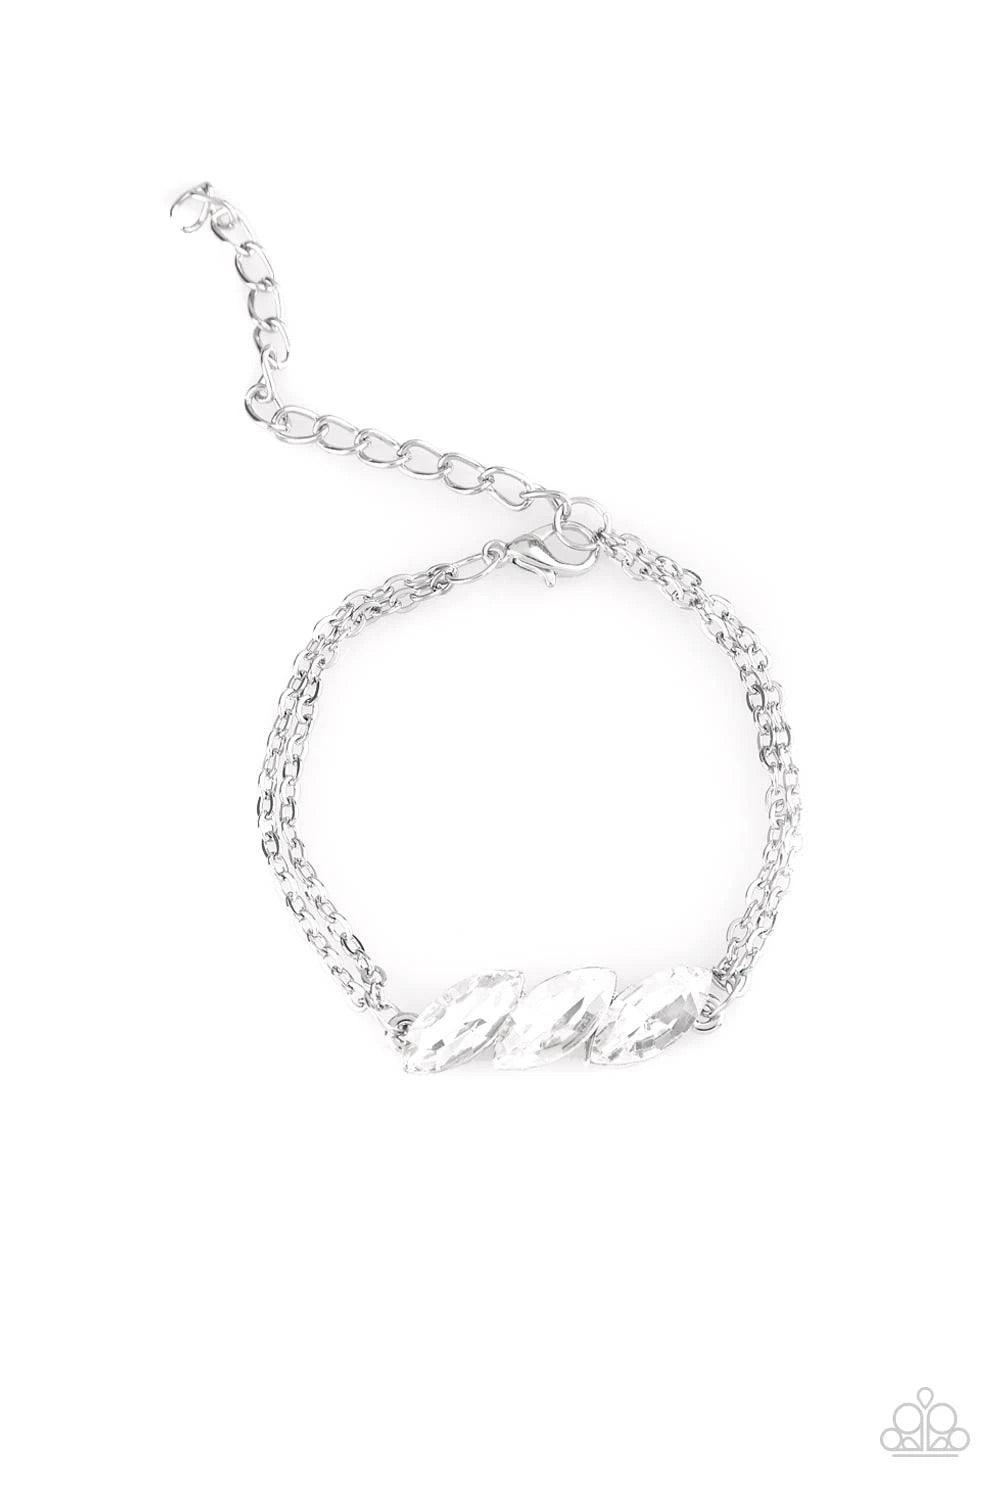 Paparazzi Accessories Pretty Priceless - White Featuring regal marquise-cuts, a trio of glittery white rhinestones join across the center of the wrist for a timeless look. Features an adjustable clasp closure. Sold as one individual bracelet. Jewelry